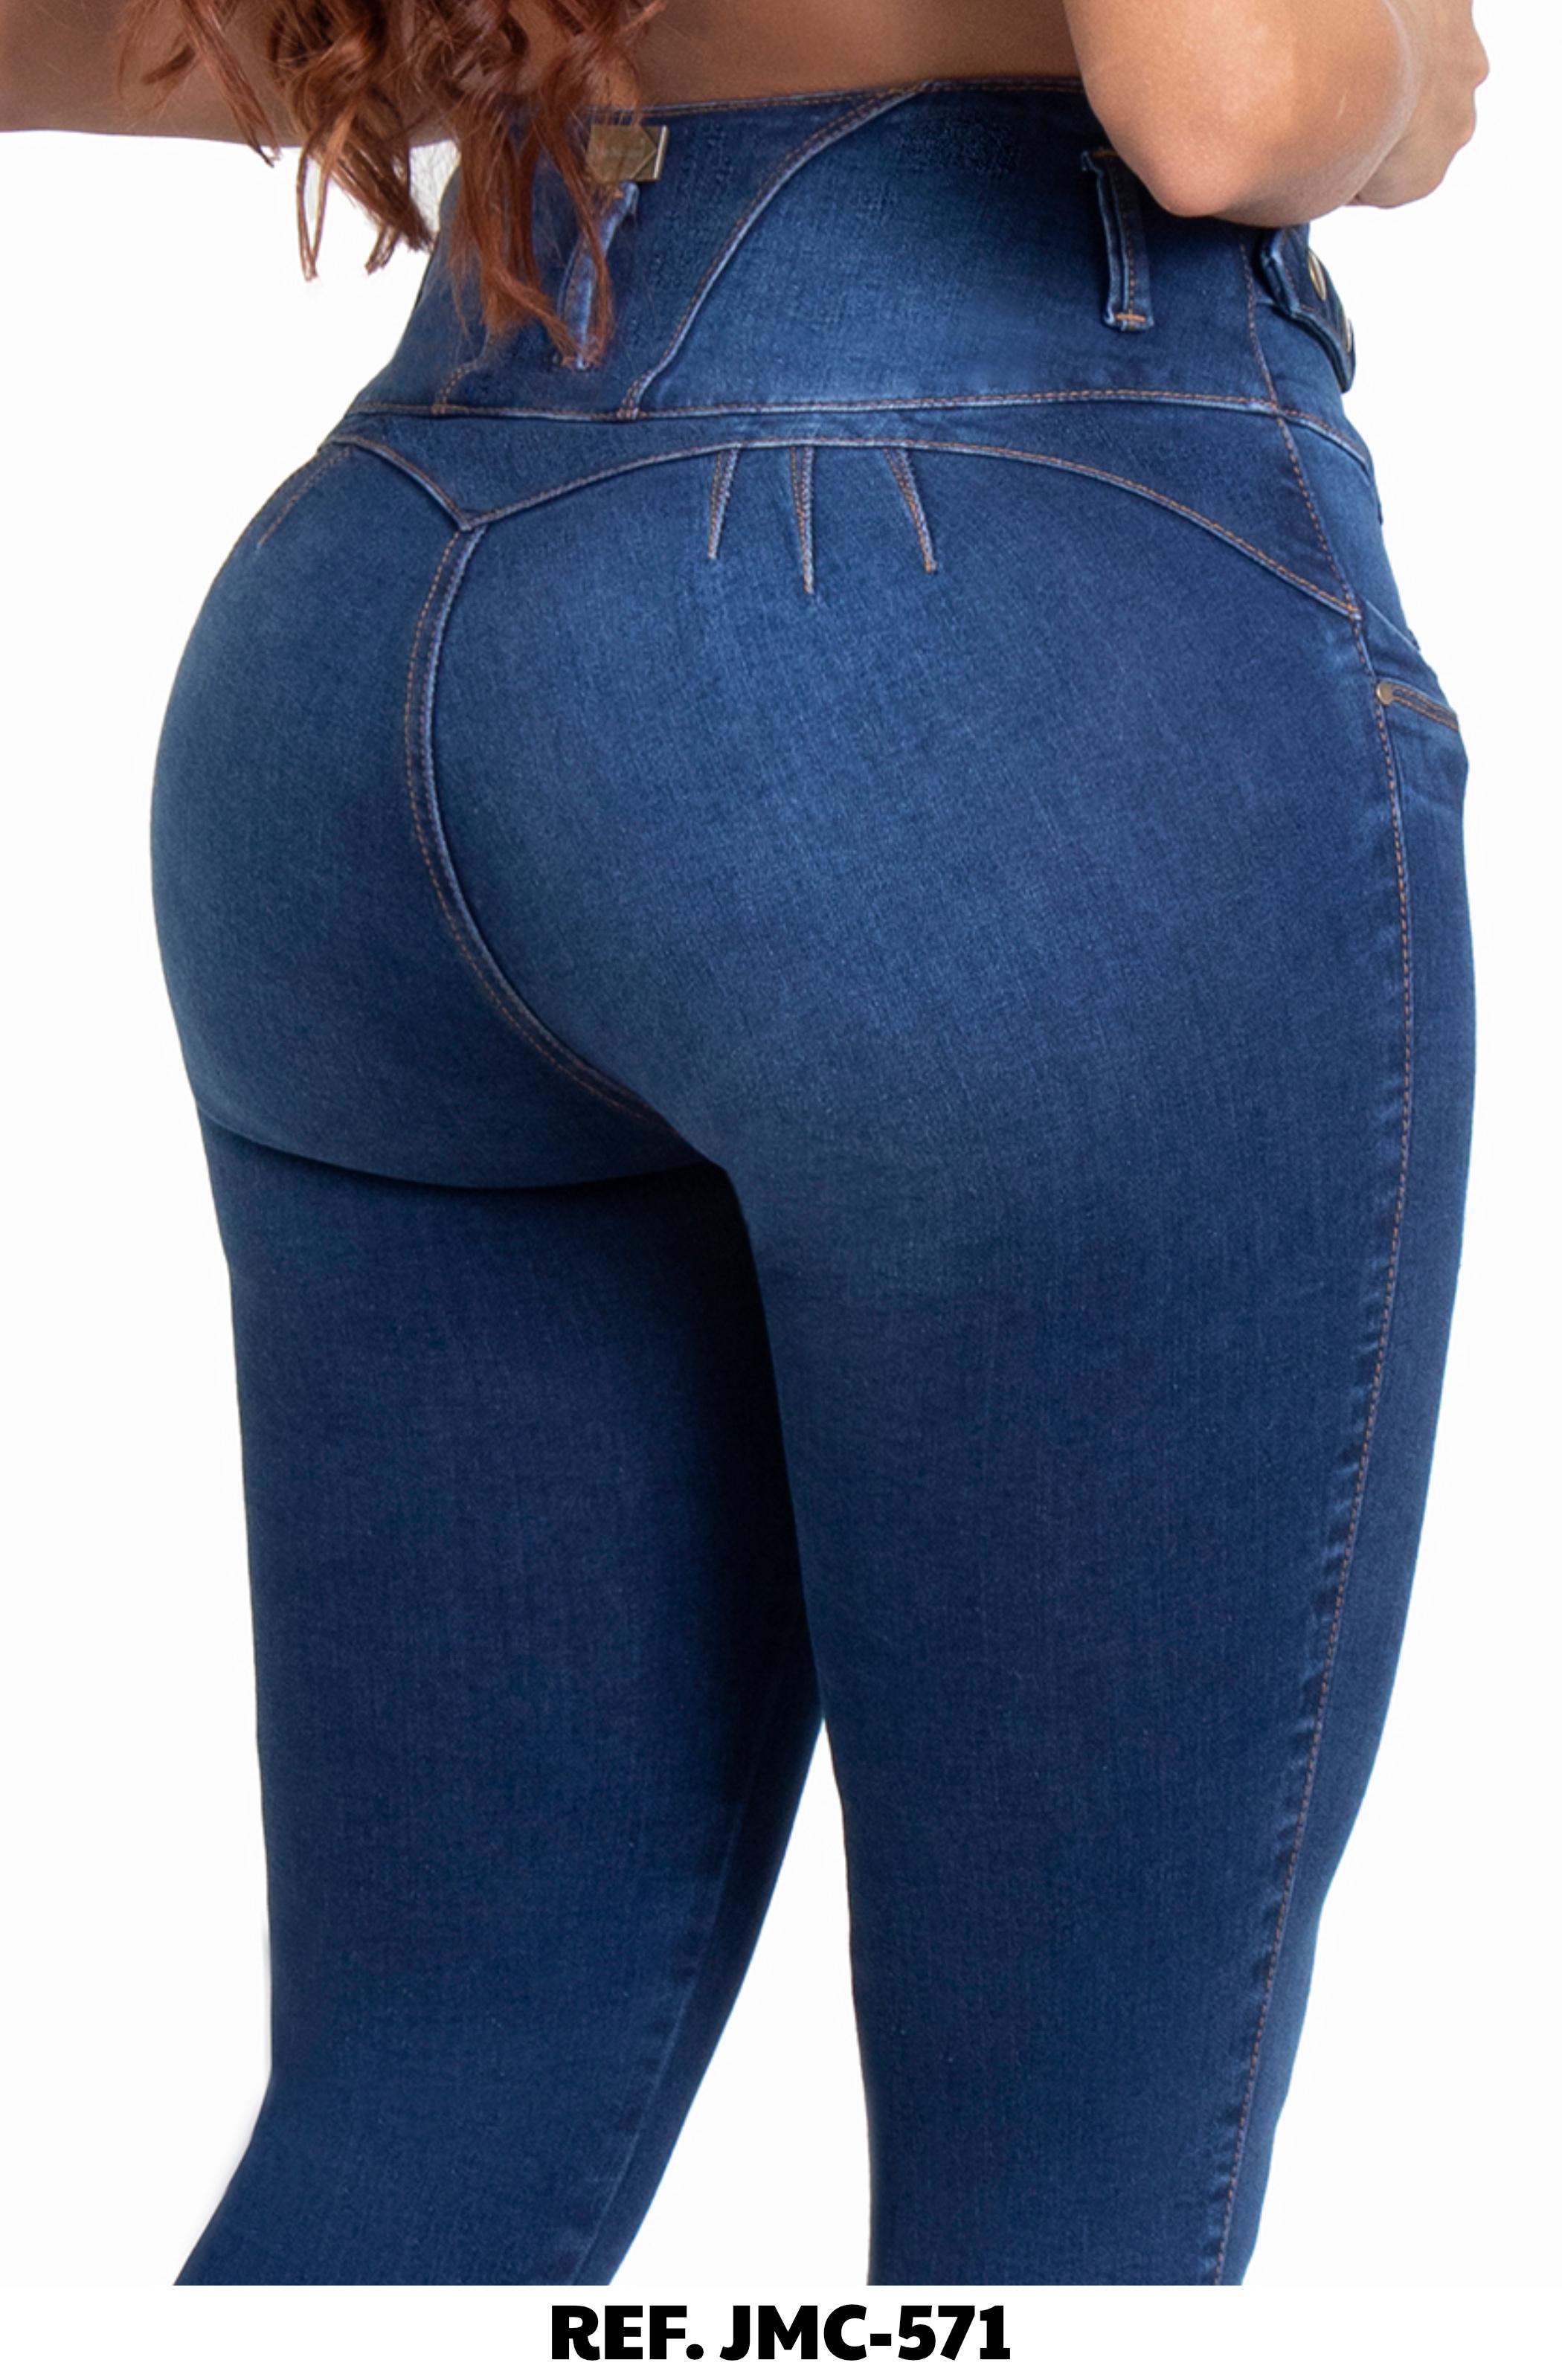 Comprar Jean Push Up Colombiano